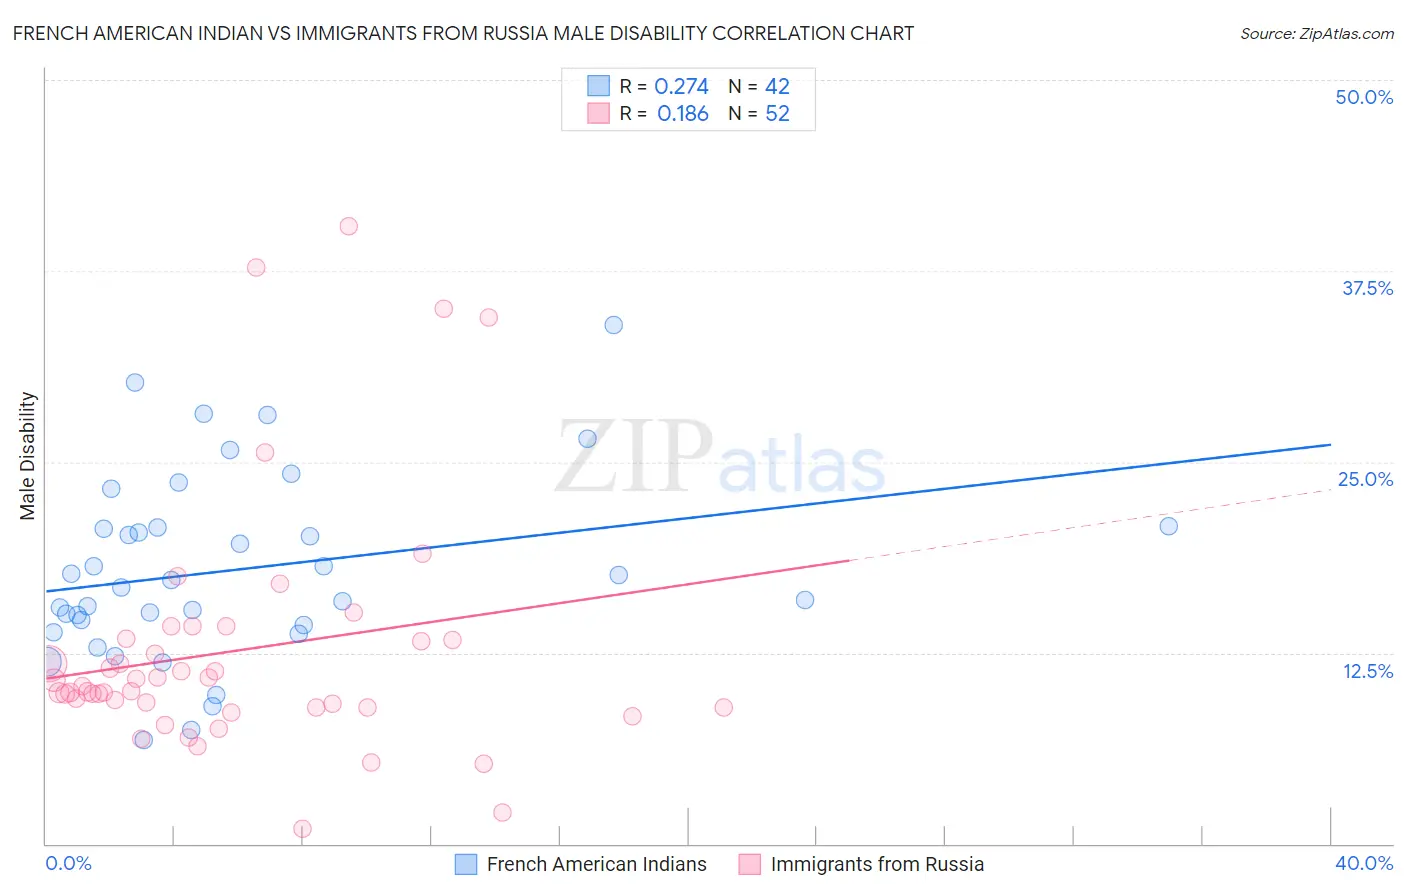 French American Indian vs Immigrants from Russia Male Disability